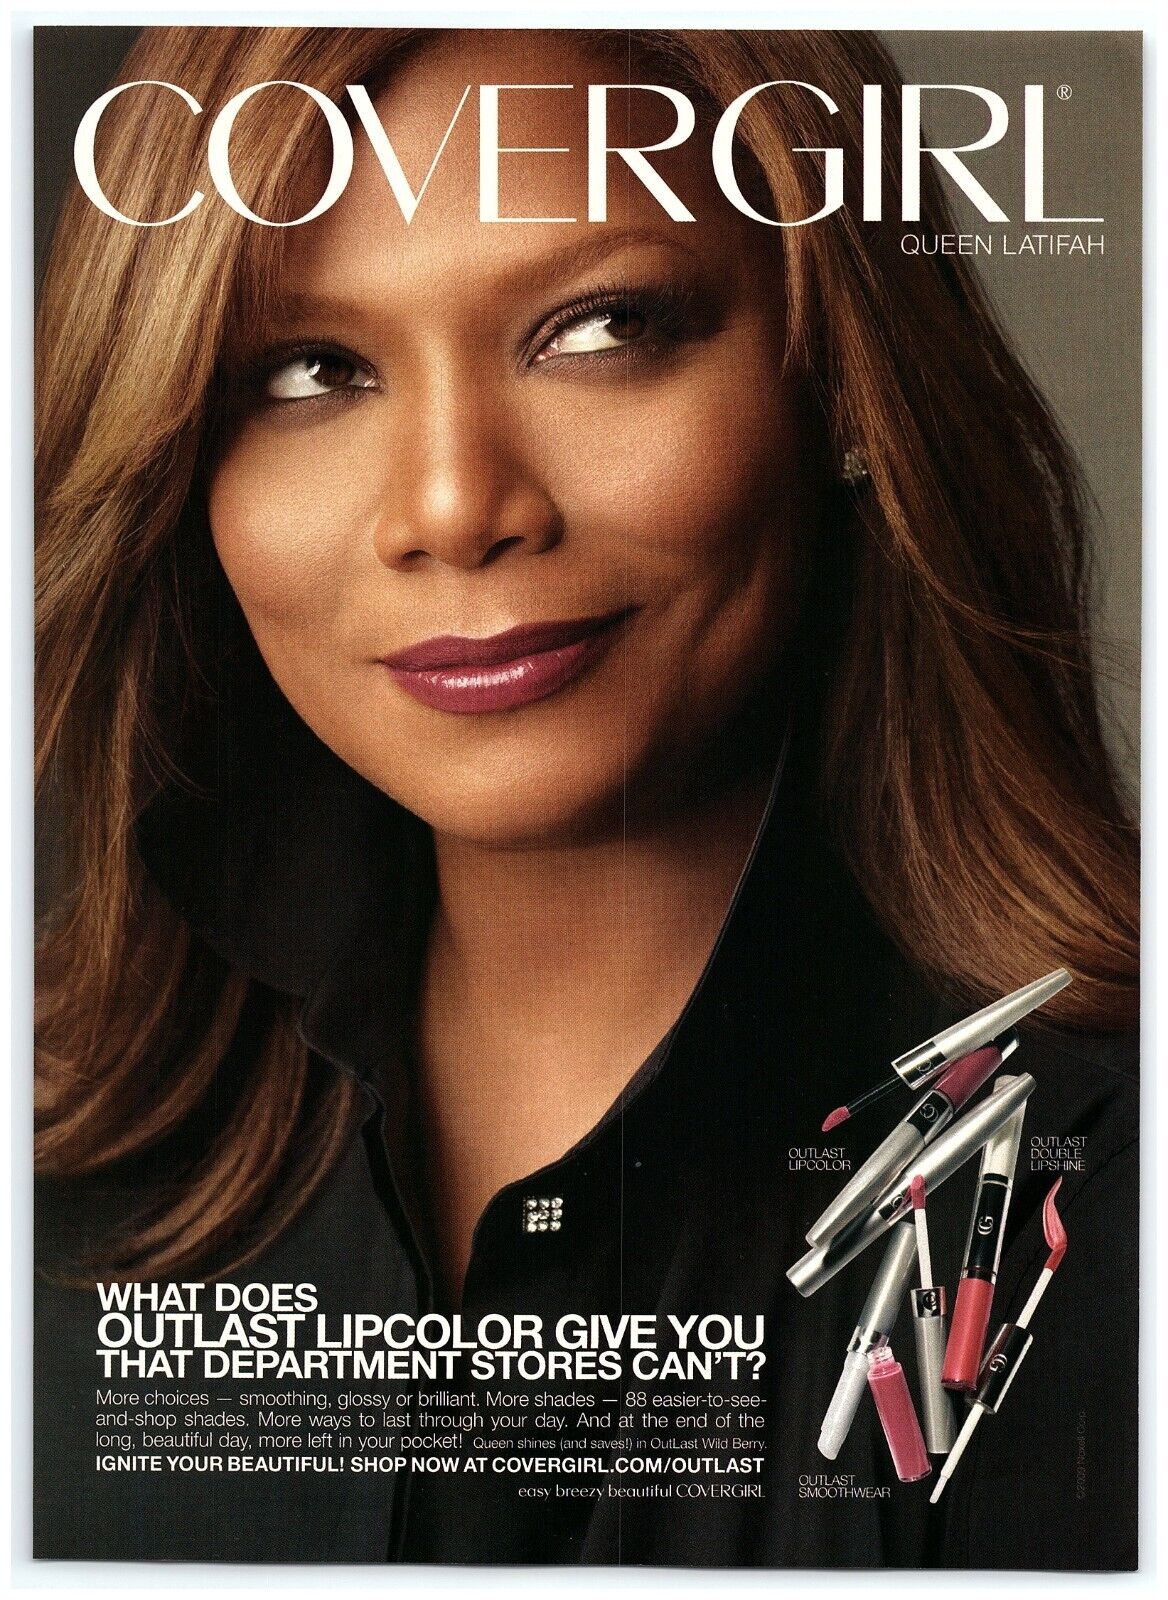 2009 Covergirl Outlast Makeup Print Ad, Queen Latifah LipColor double LipShine